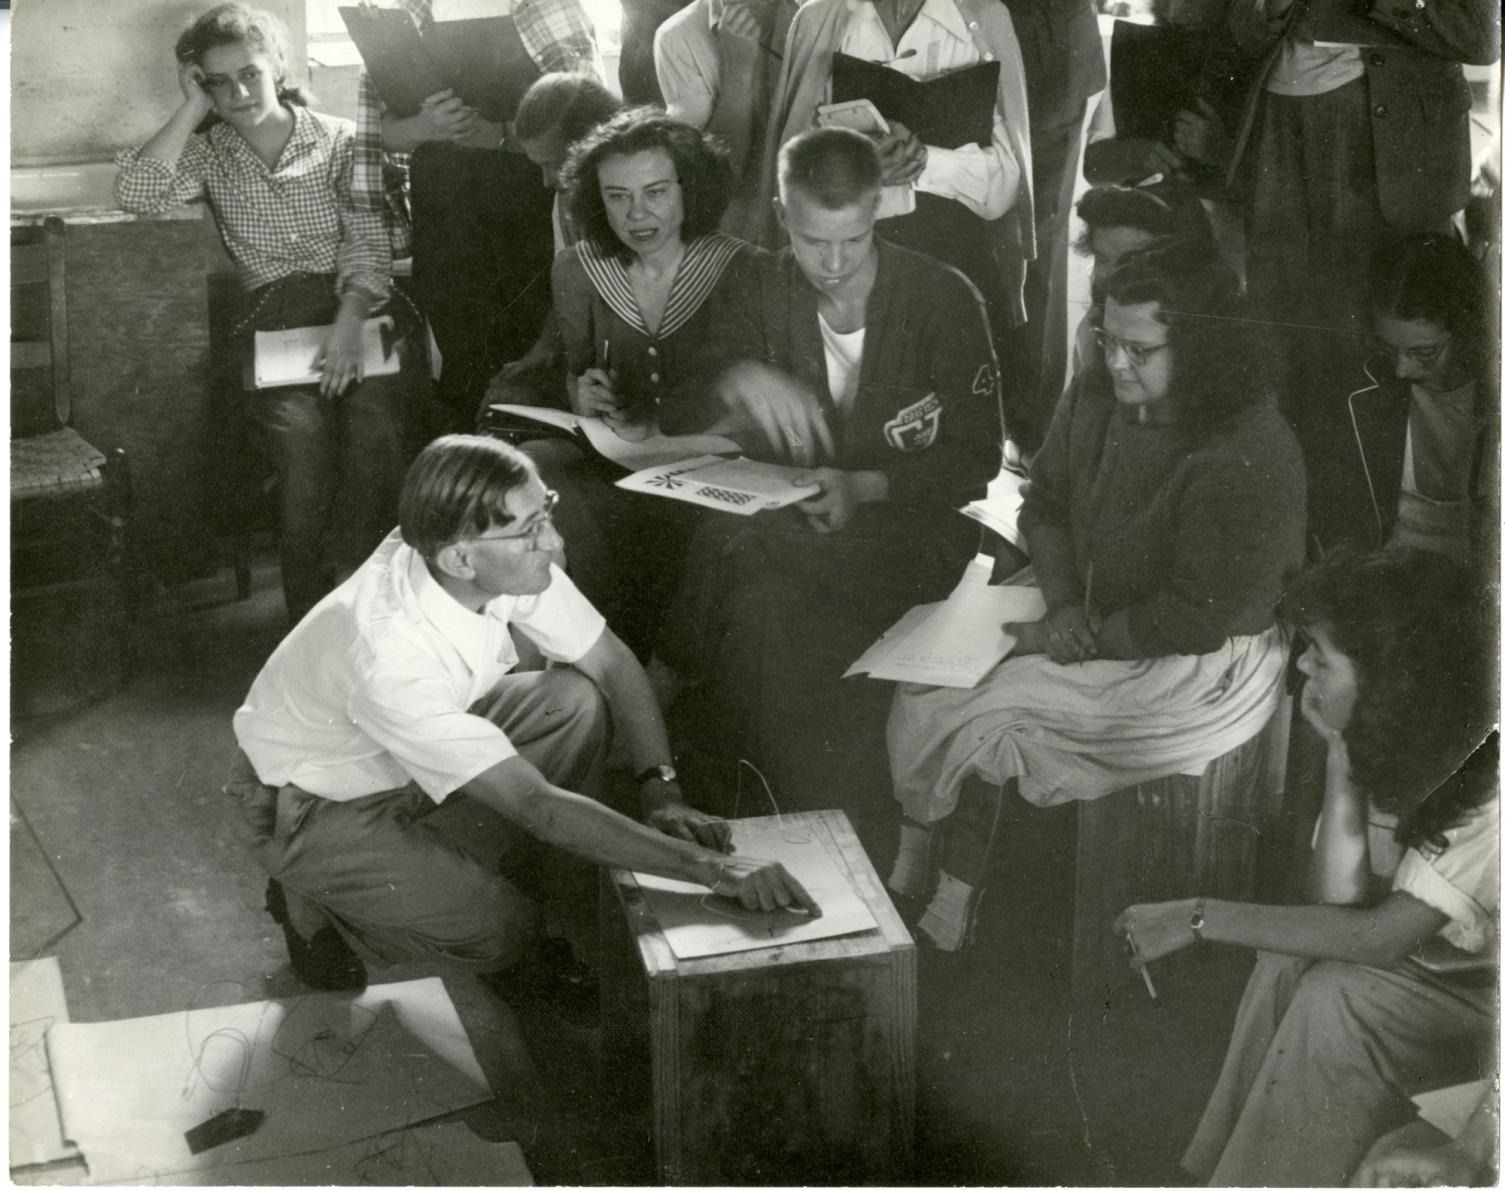 Photograph from Black Mountain College